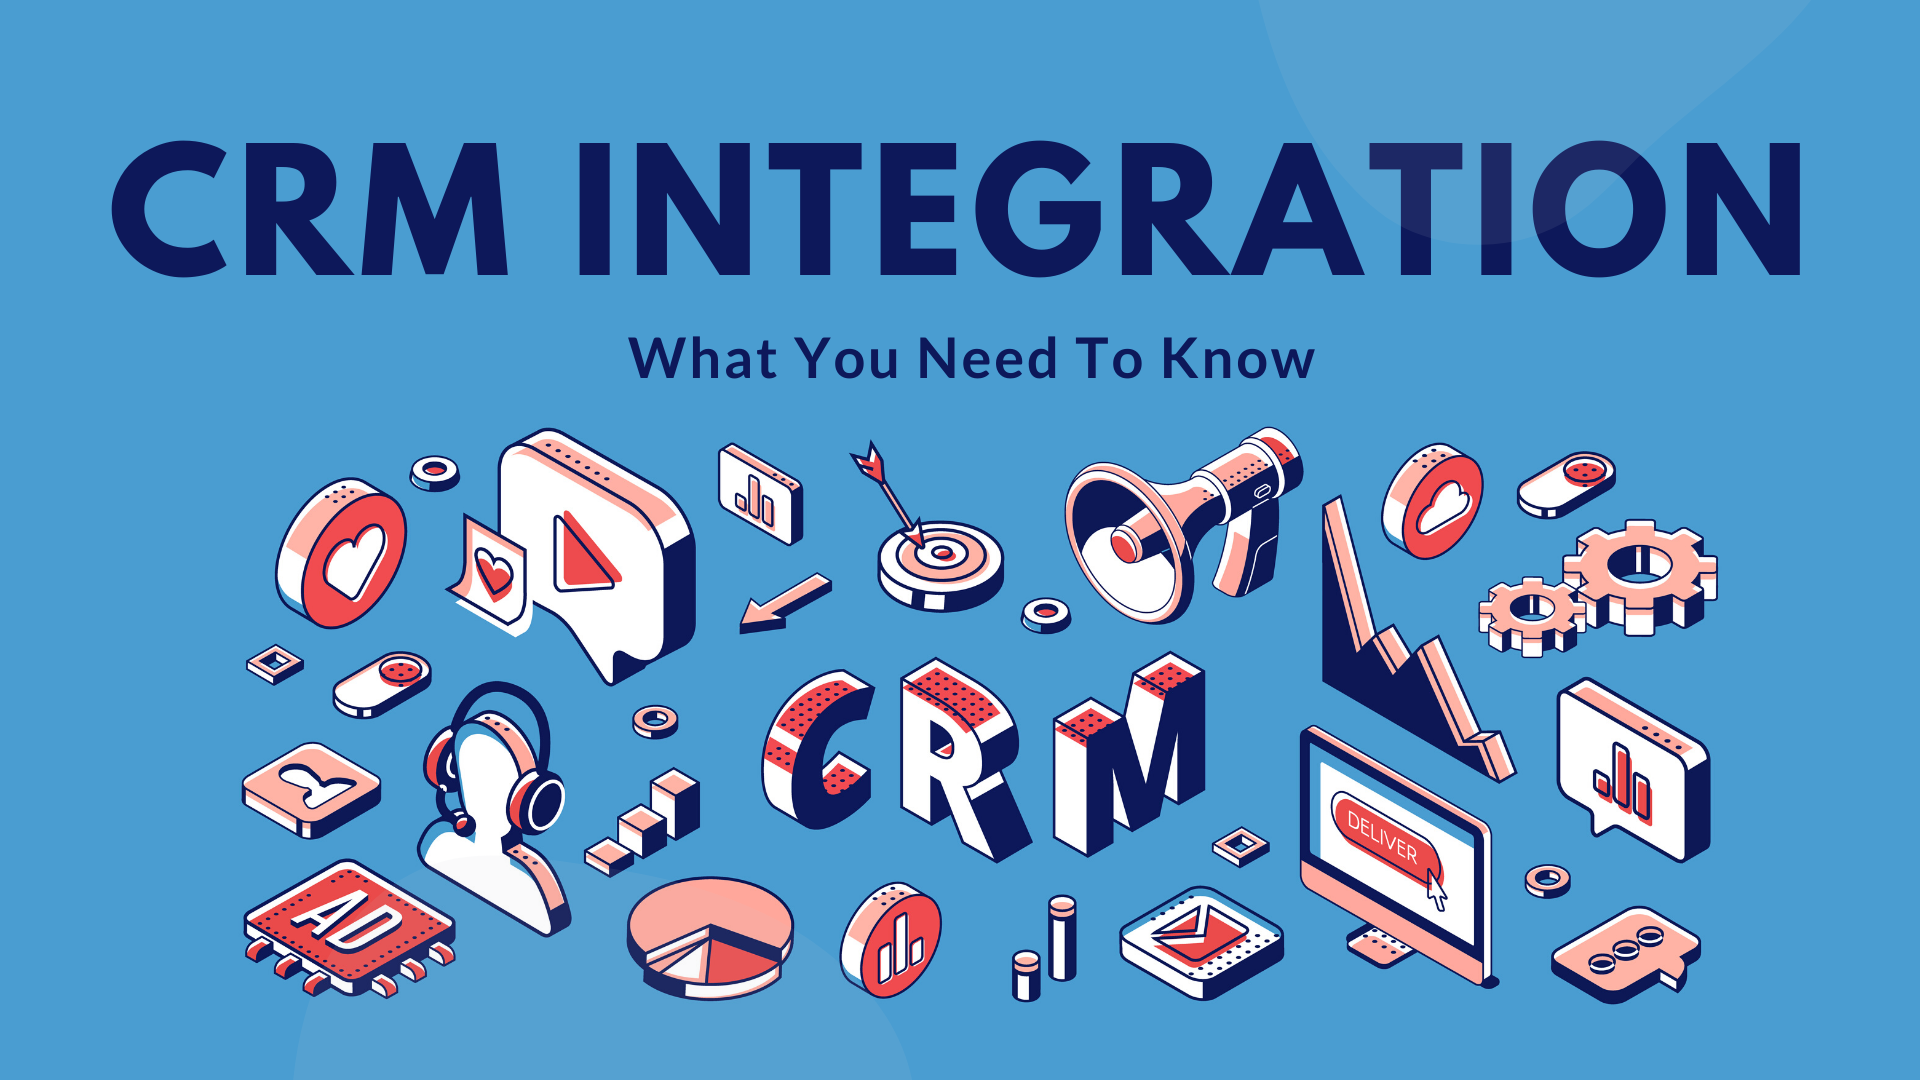 CRM Integration: What You Need To Know